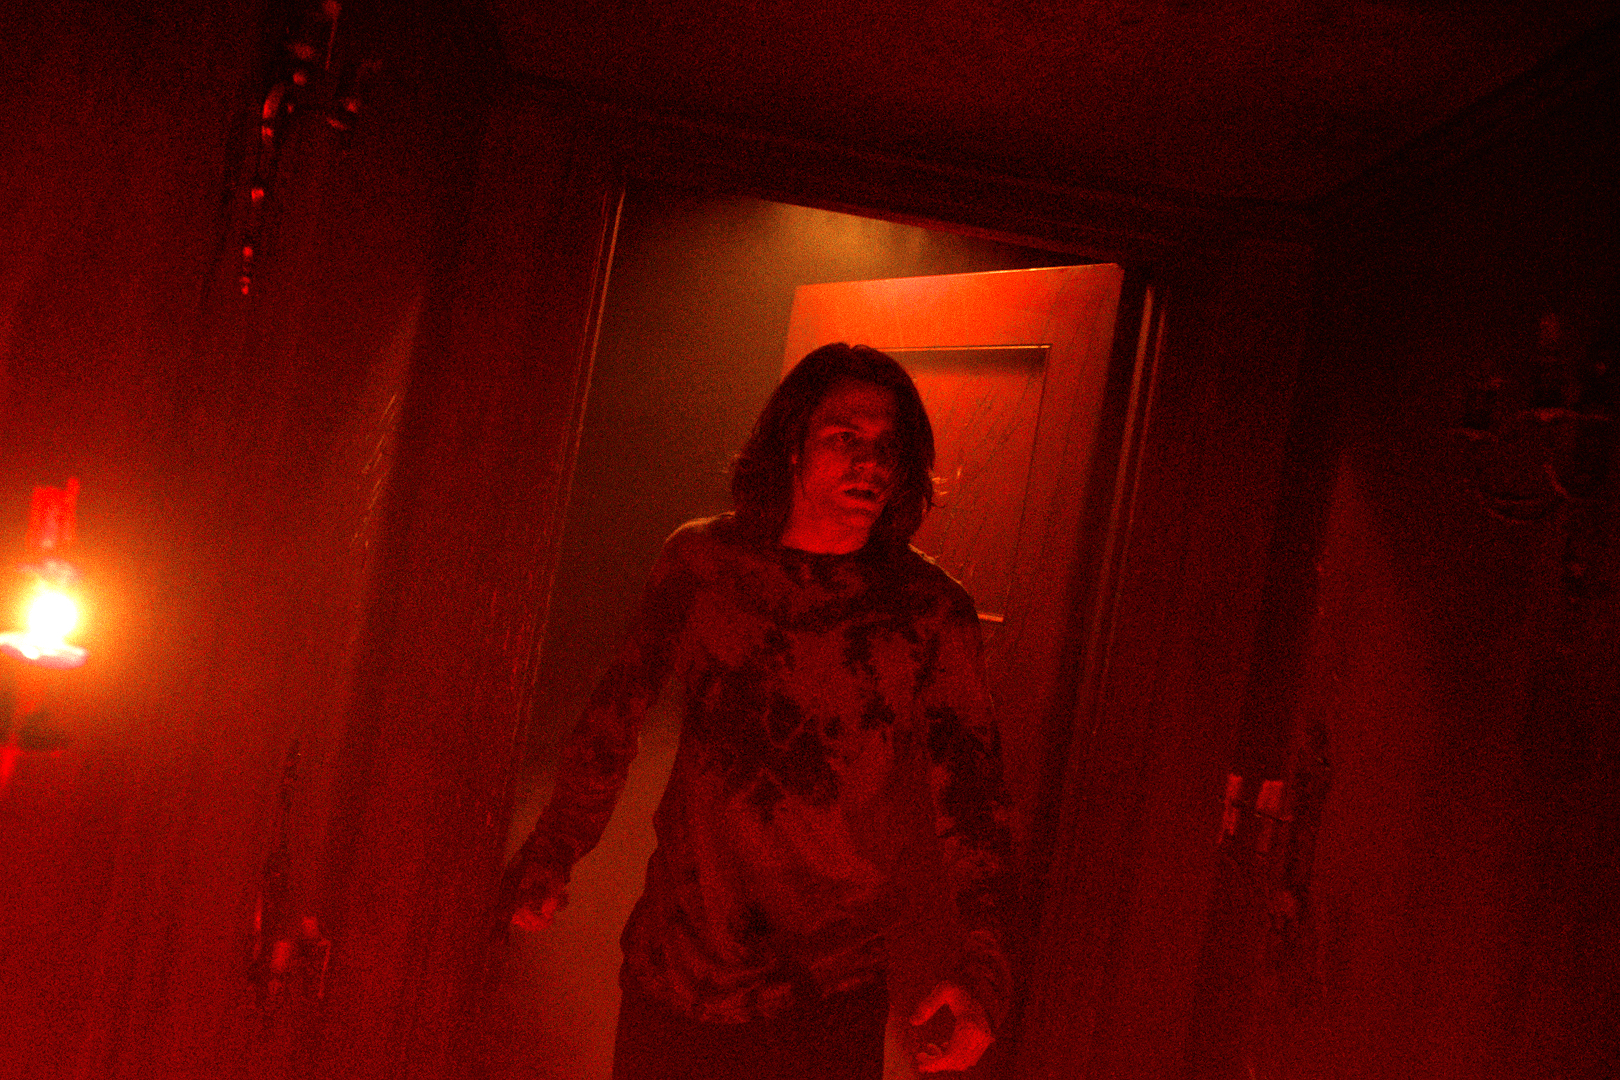 Ty Simpkins stands in a red doorway in Insidious: The Red Door.